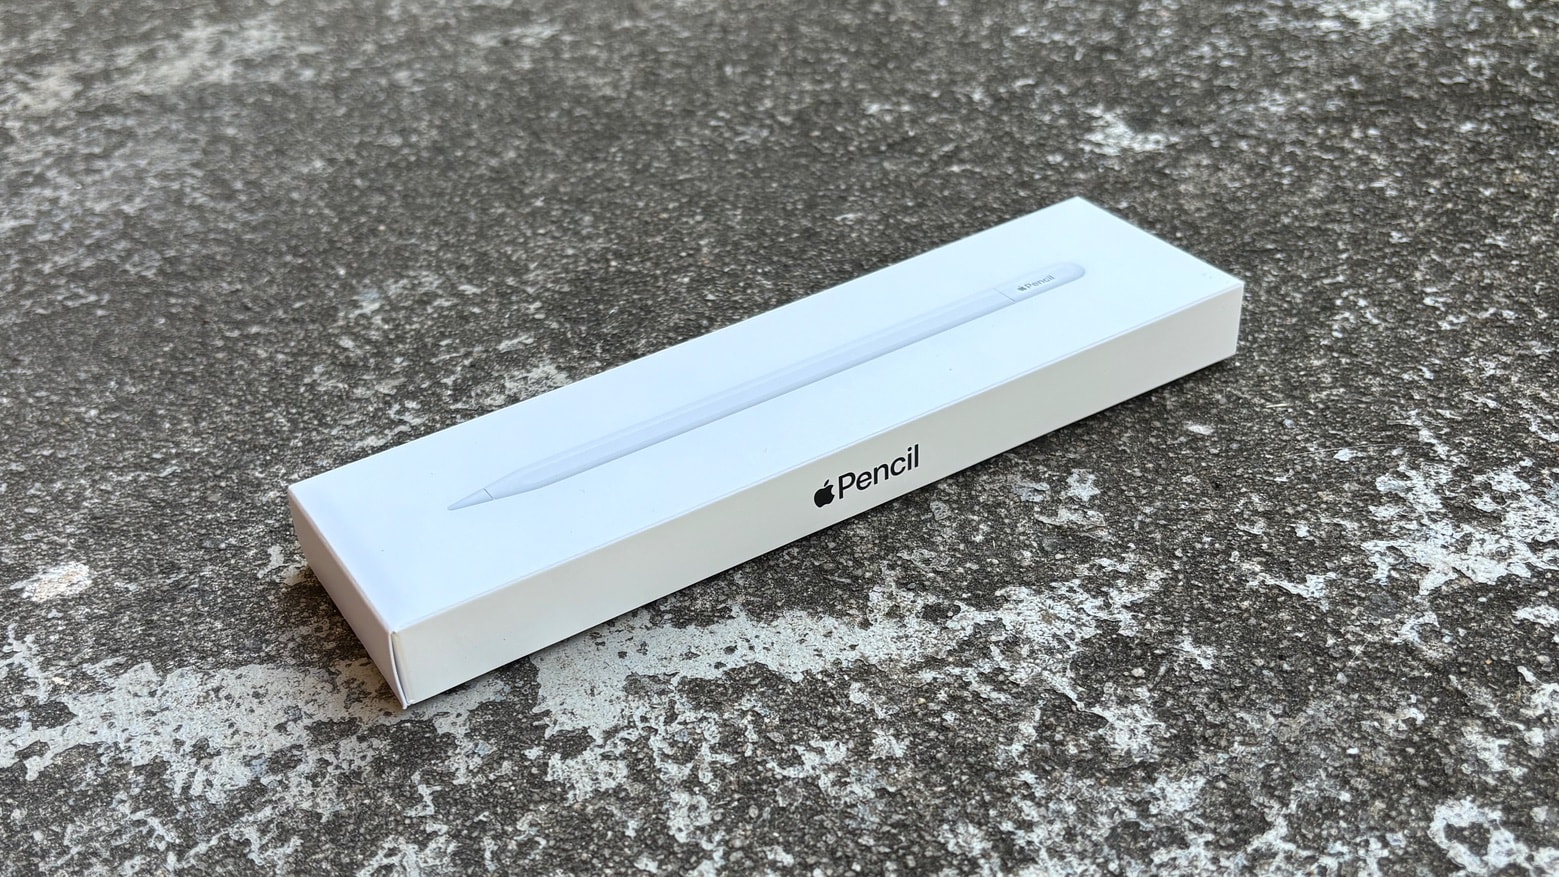 New USB-C Apple Pencil is lower in price but not usability [Review]